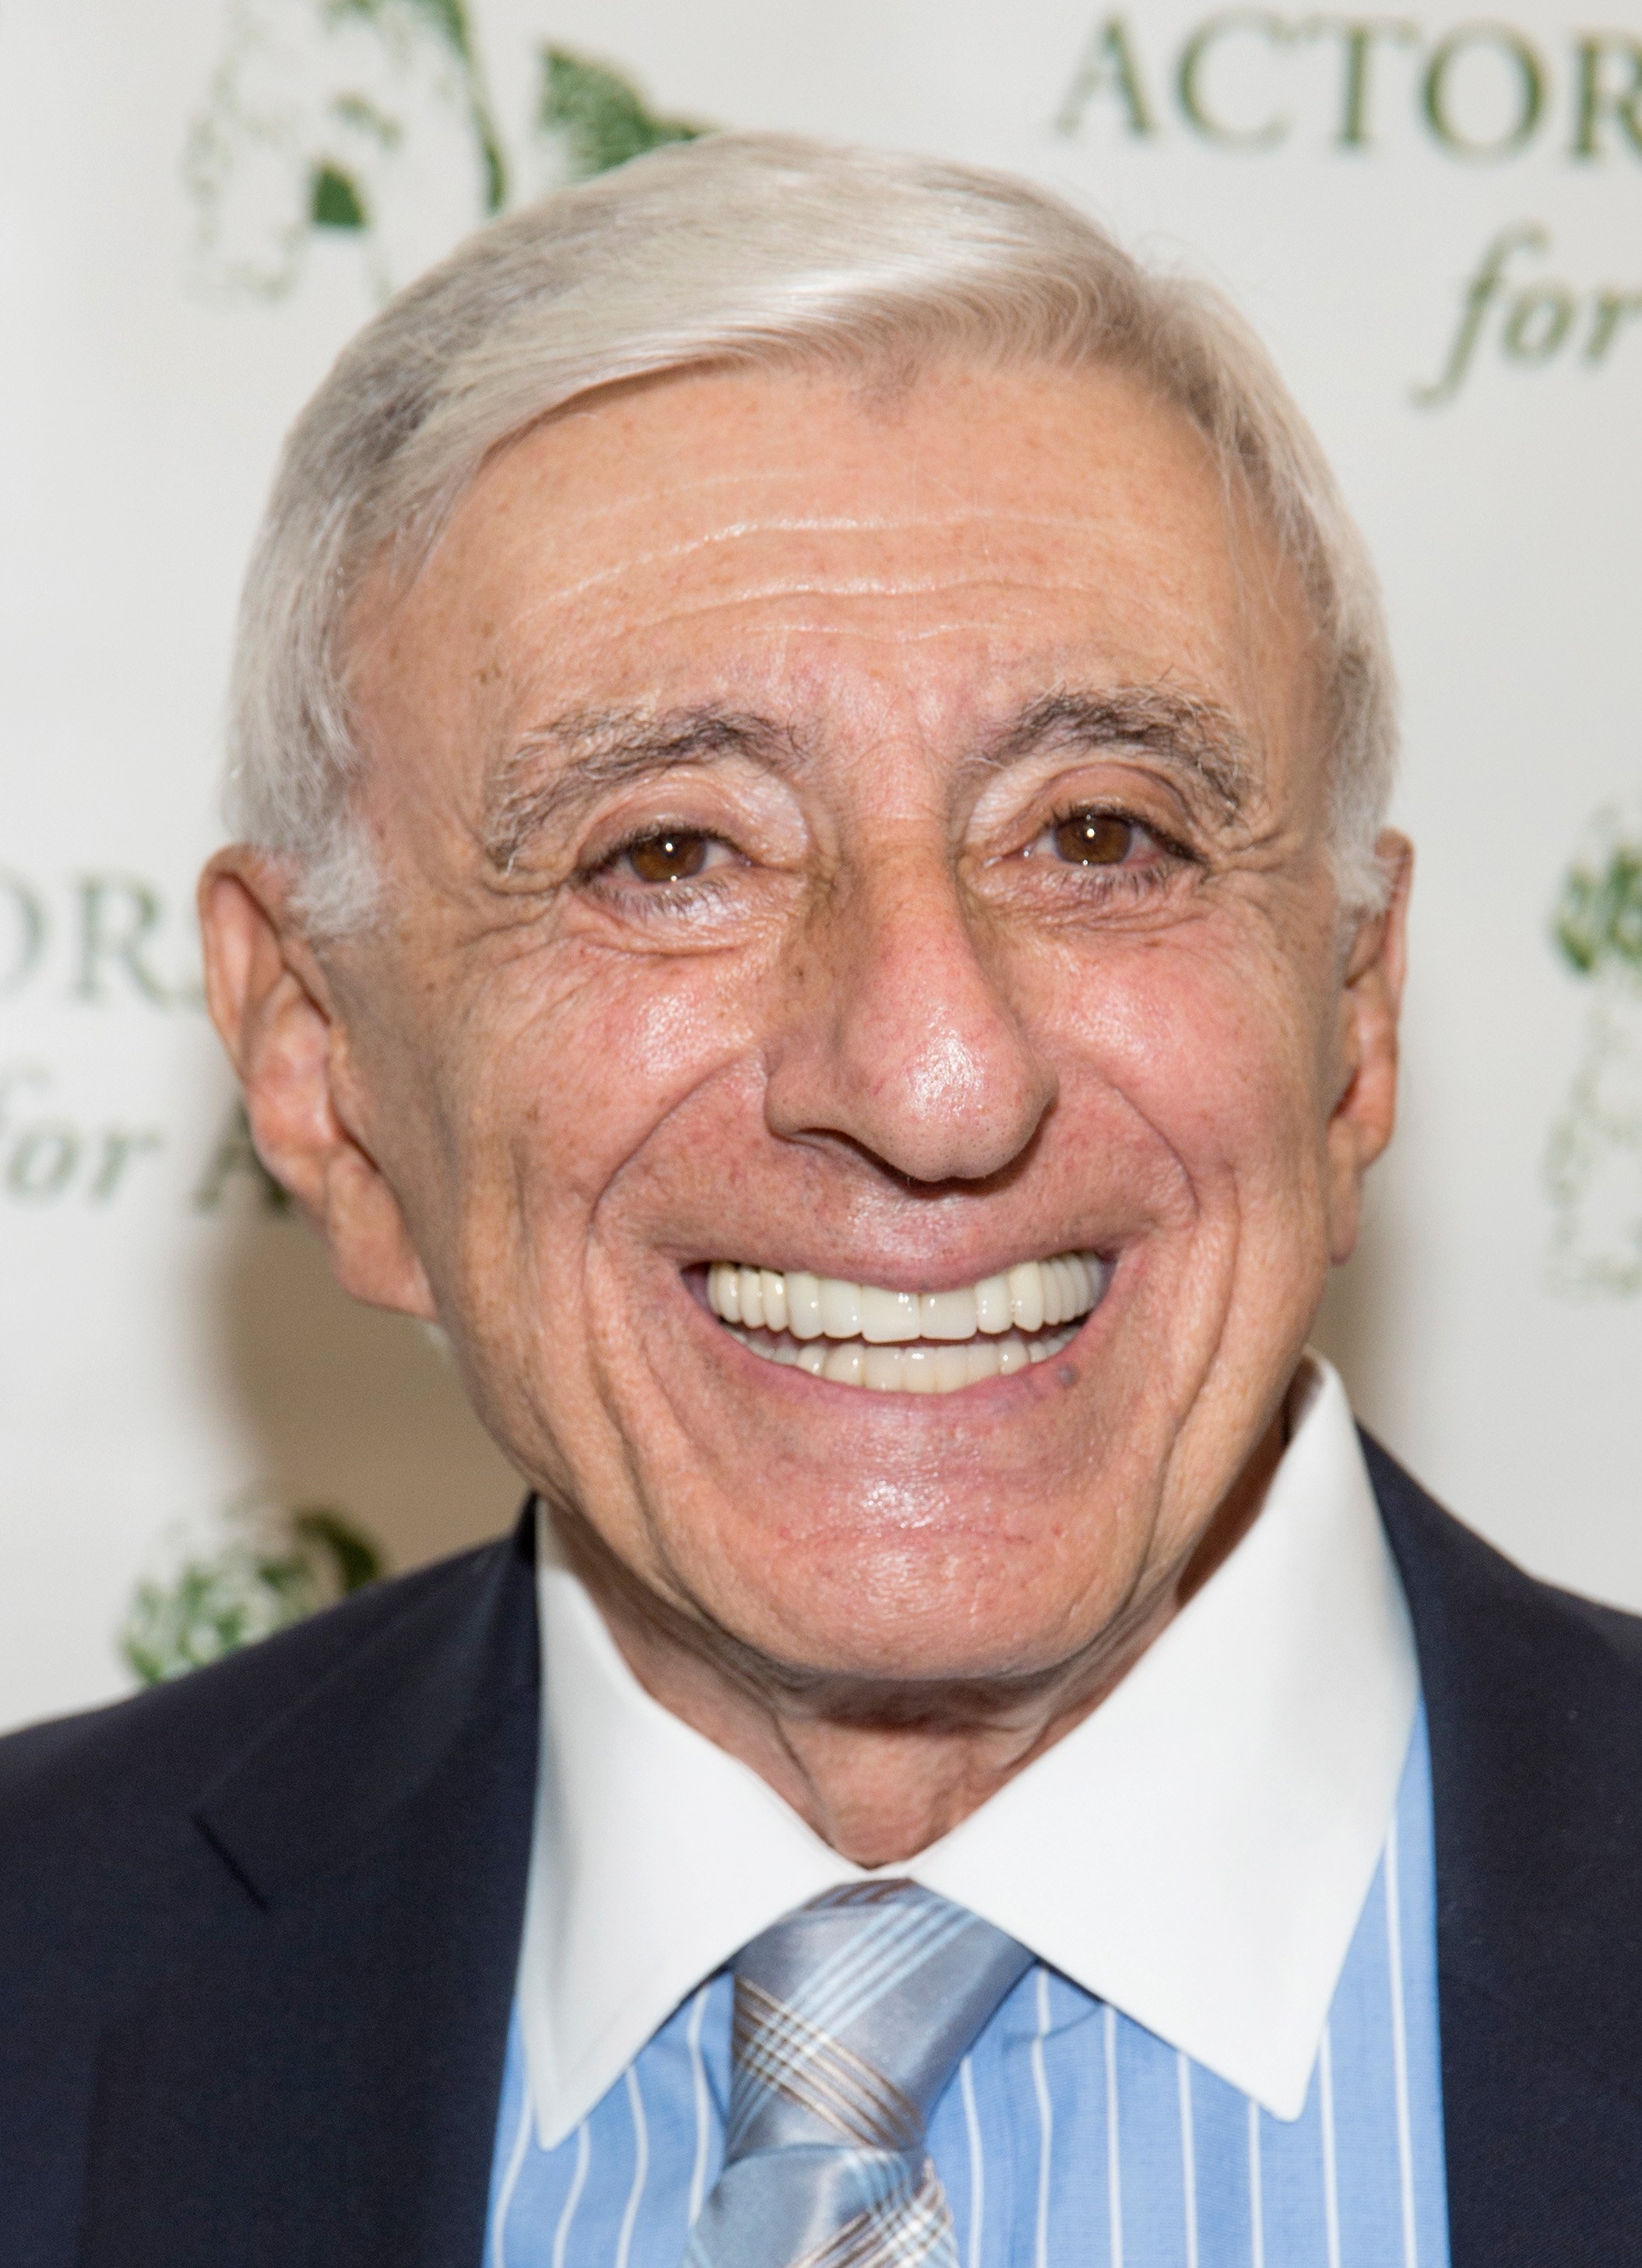 Actor Jamie Farr at the 'Joy To The Animals' luncheon and fundraiser at Universal City Hilton & Towers on December 4, 2016 in Universal City, California. | Source: Getty Images